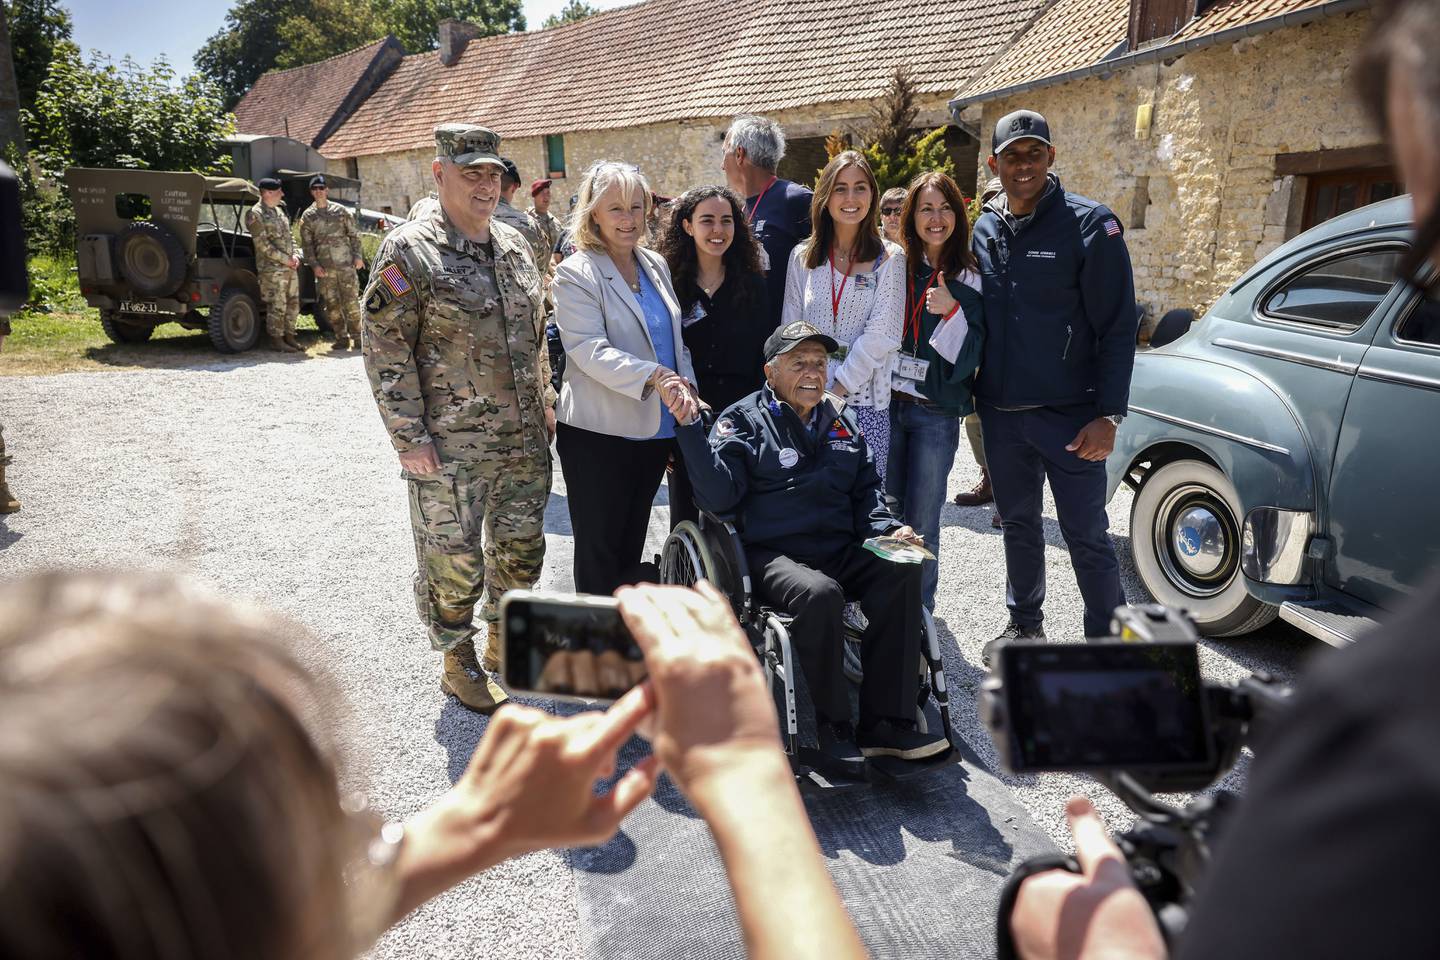 U.S. Gen. Mark Milley, left, his wife Hollyanne Milley, 2nd left, veteran Sgt. Andrew Negra, center on wheel chair, and his family pose for a group photo during a gathering in preparation of the 79th D-Day anniversary in La Fiere, Normandy, France, Sunday, June 4, 2023.